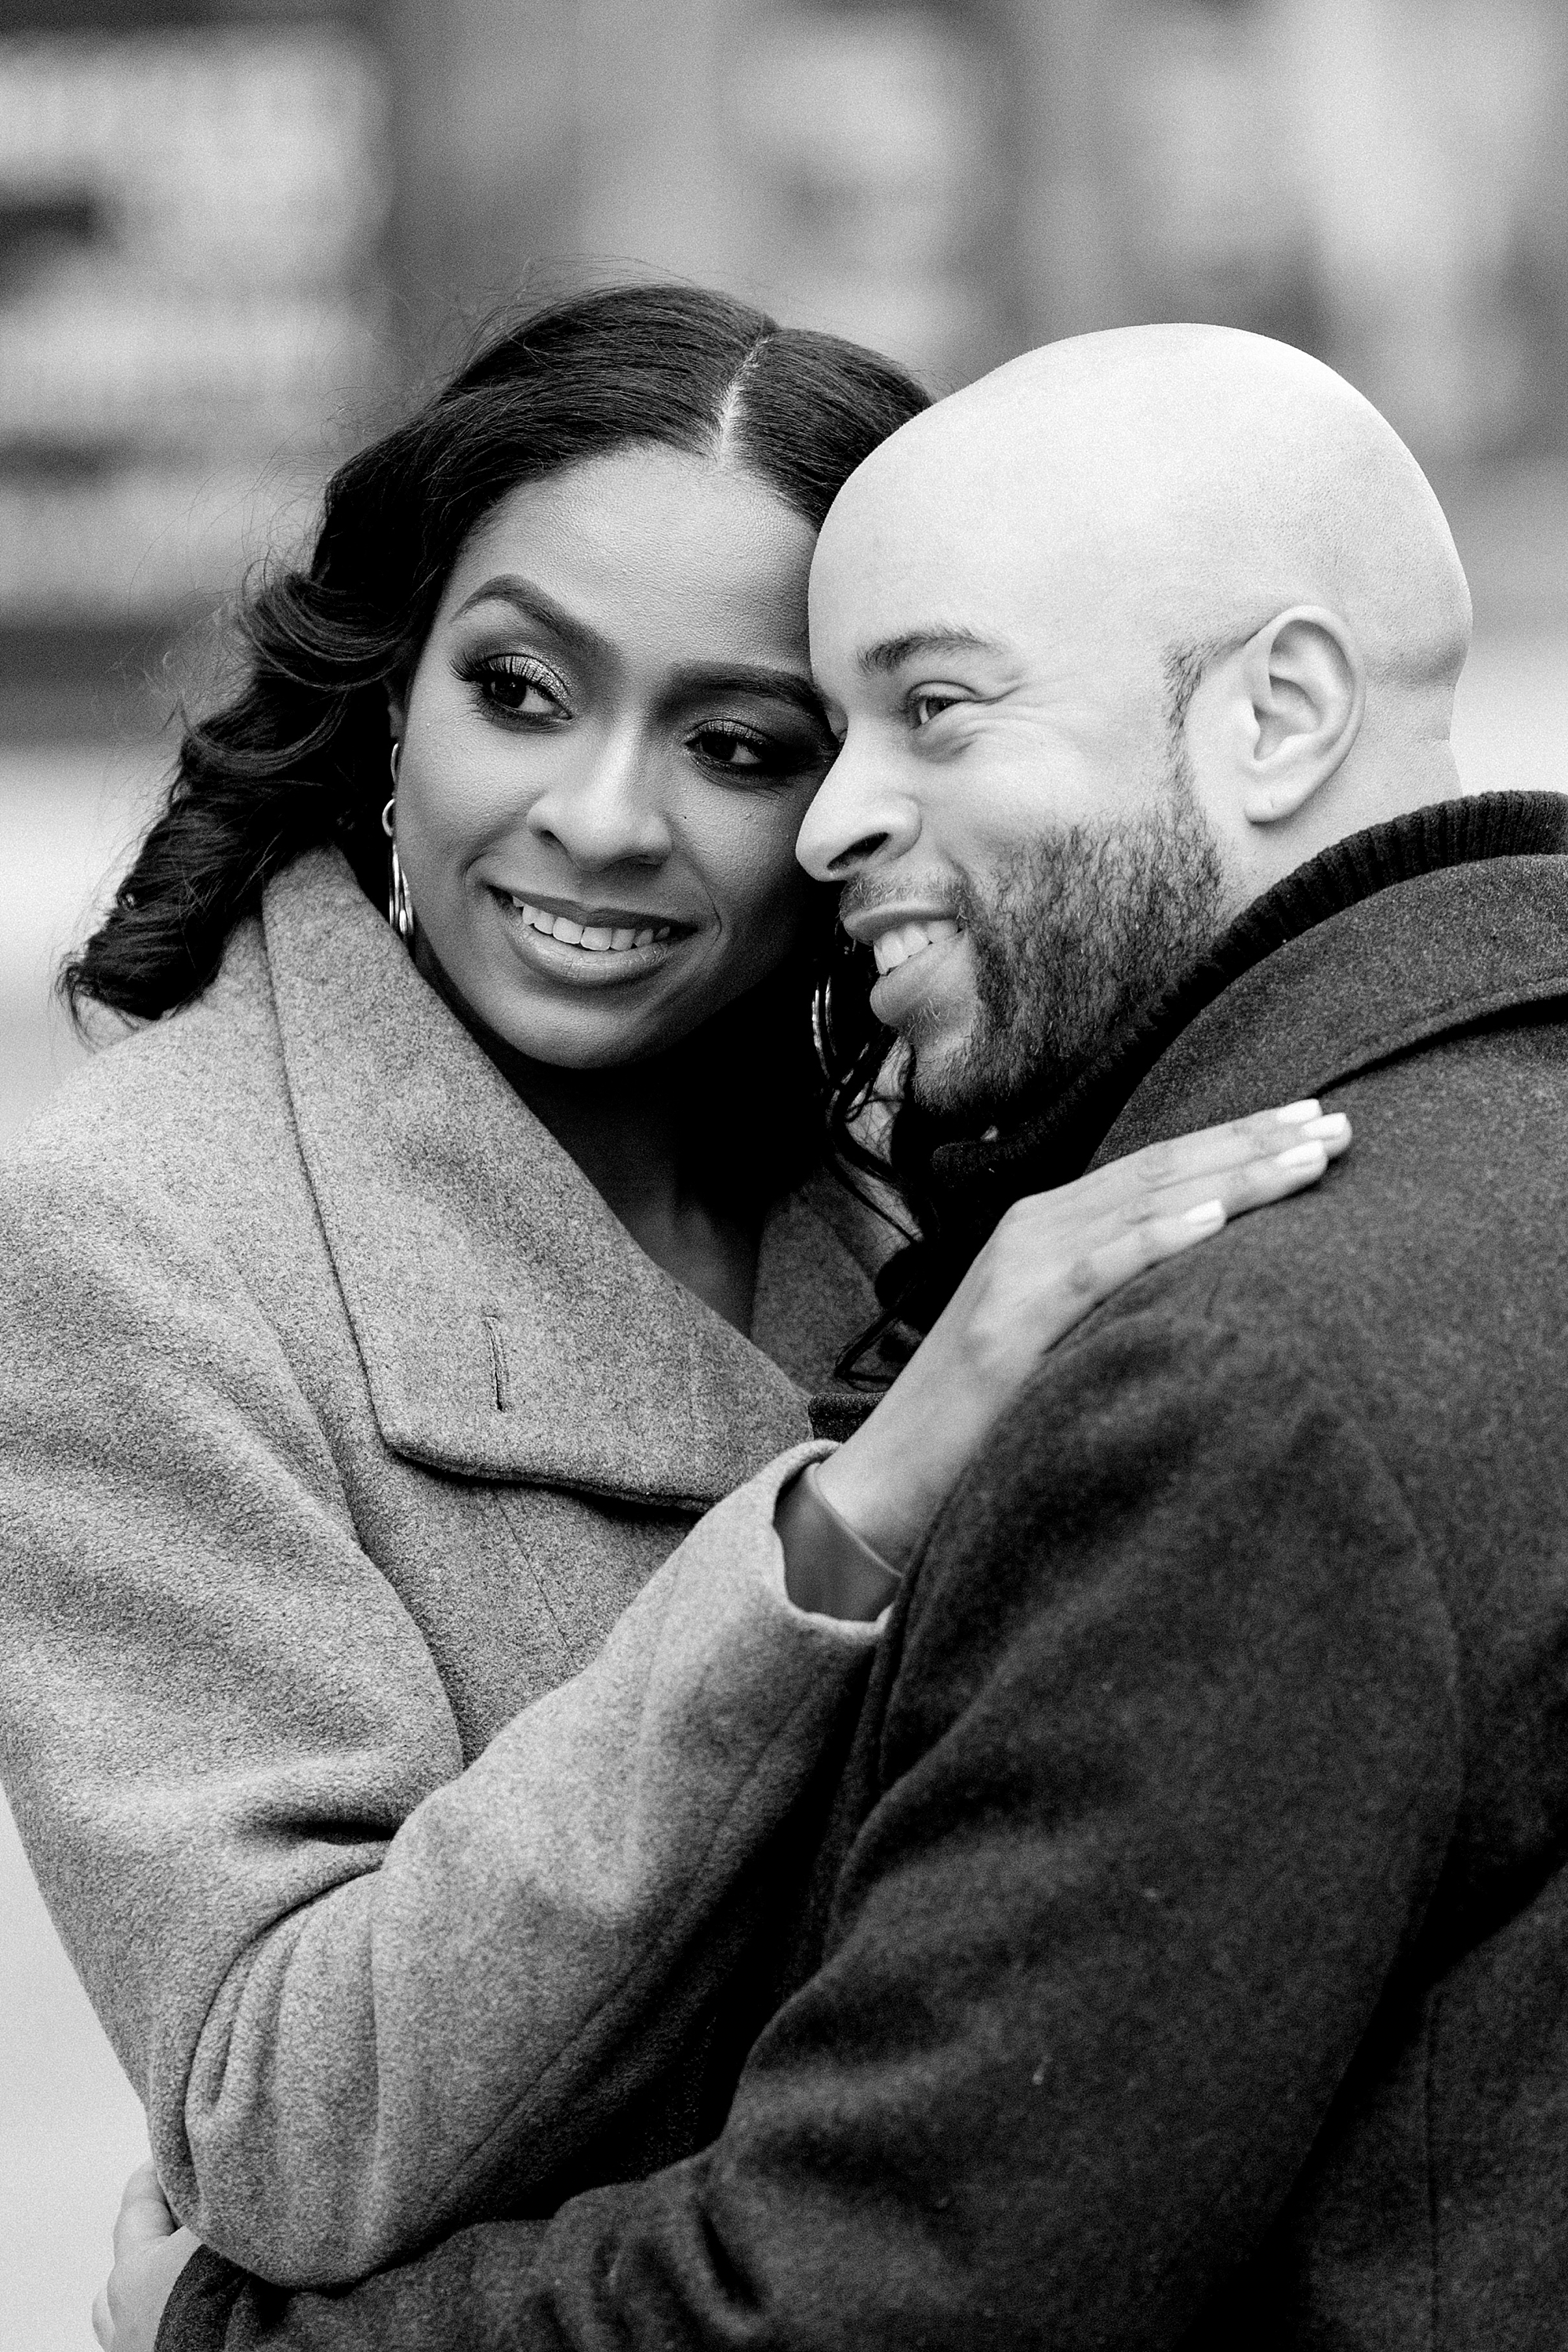 A chic winter engagement session in the city streets of Detroit and the Detroit Public Library by Breanne Rochelle Photography.